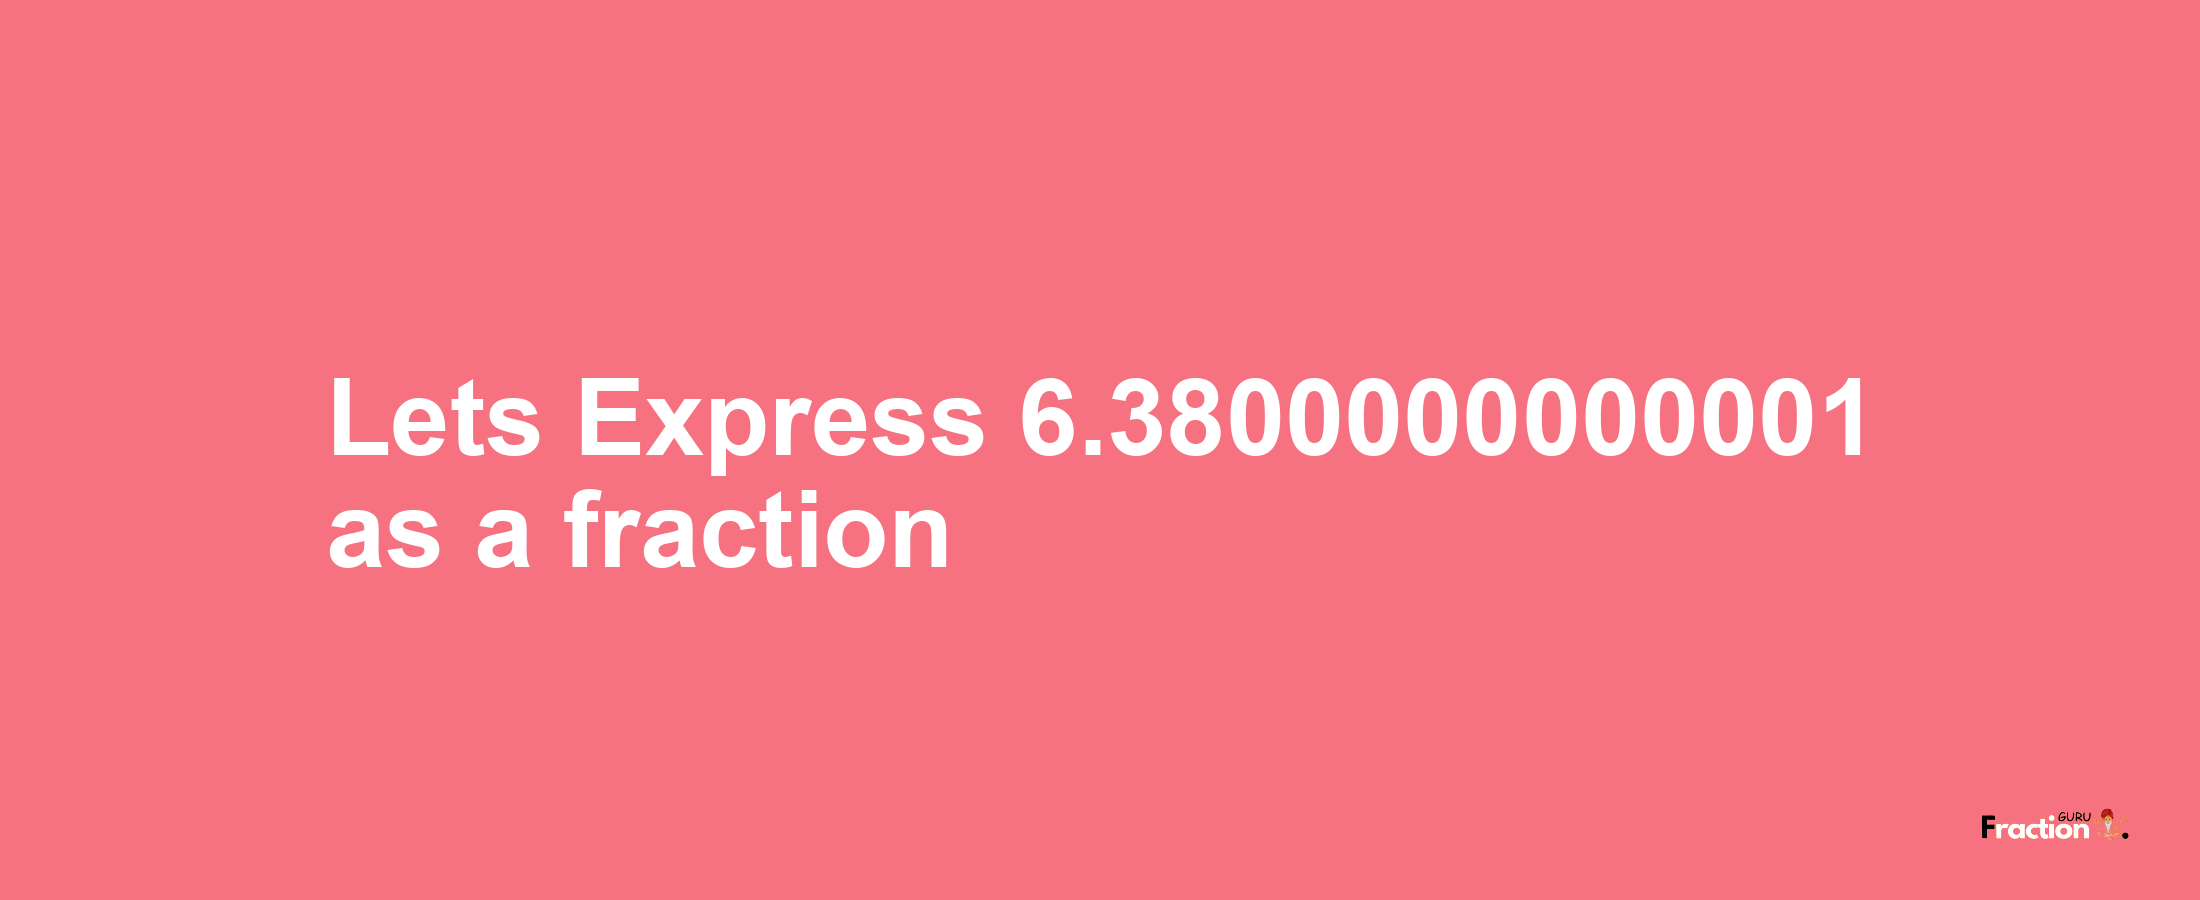 Lets Express 6.3800000000001 as afraction